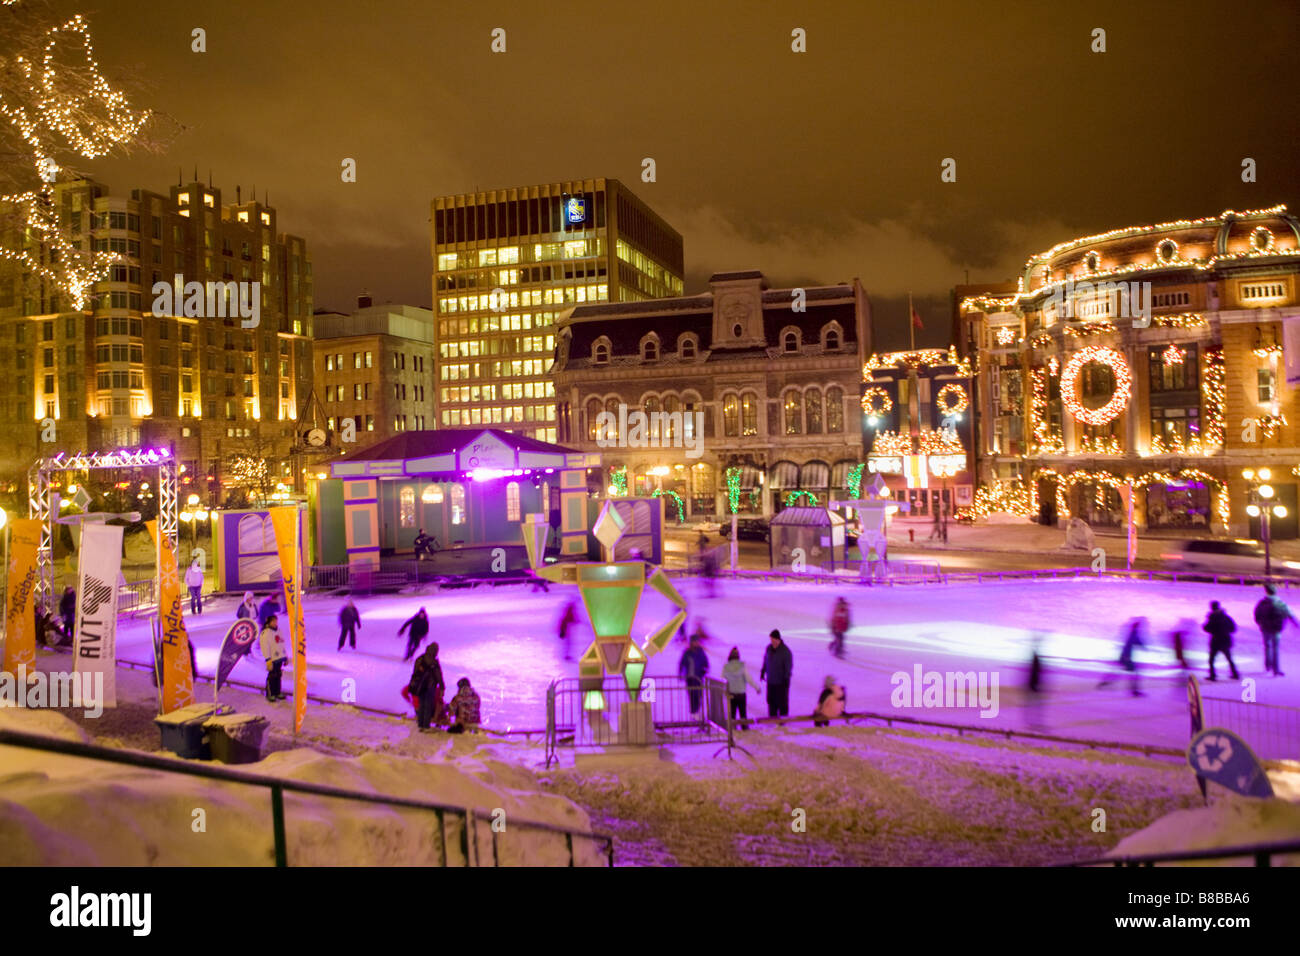 People ice skating at night, Place Hydro Quebec in front of Capitole Theater, Winter Carnival, Quebec City, Canada Stock Photo